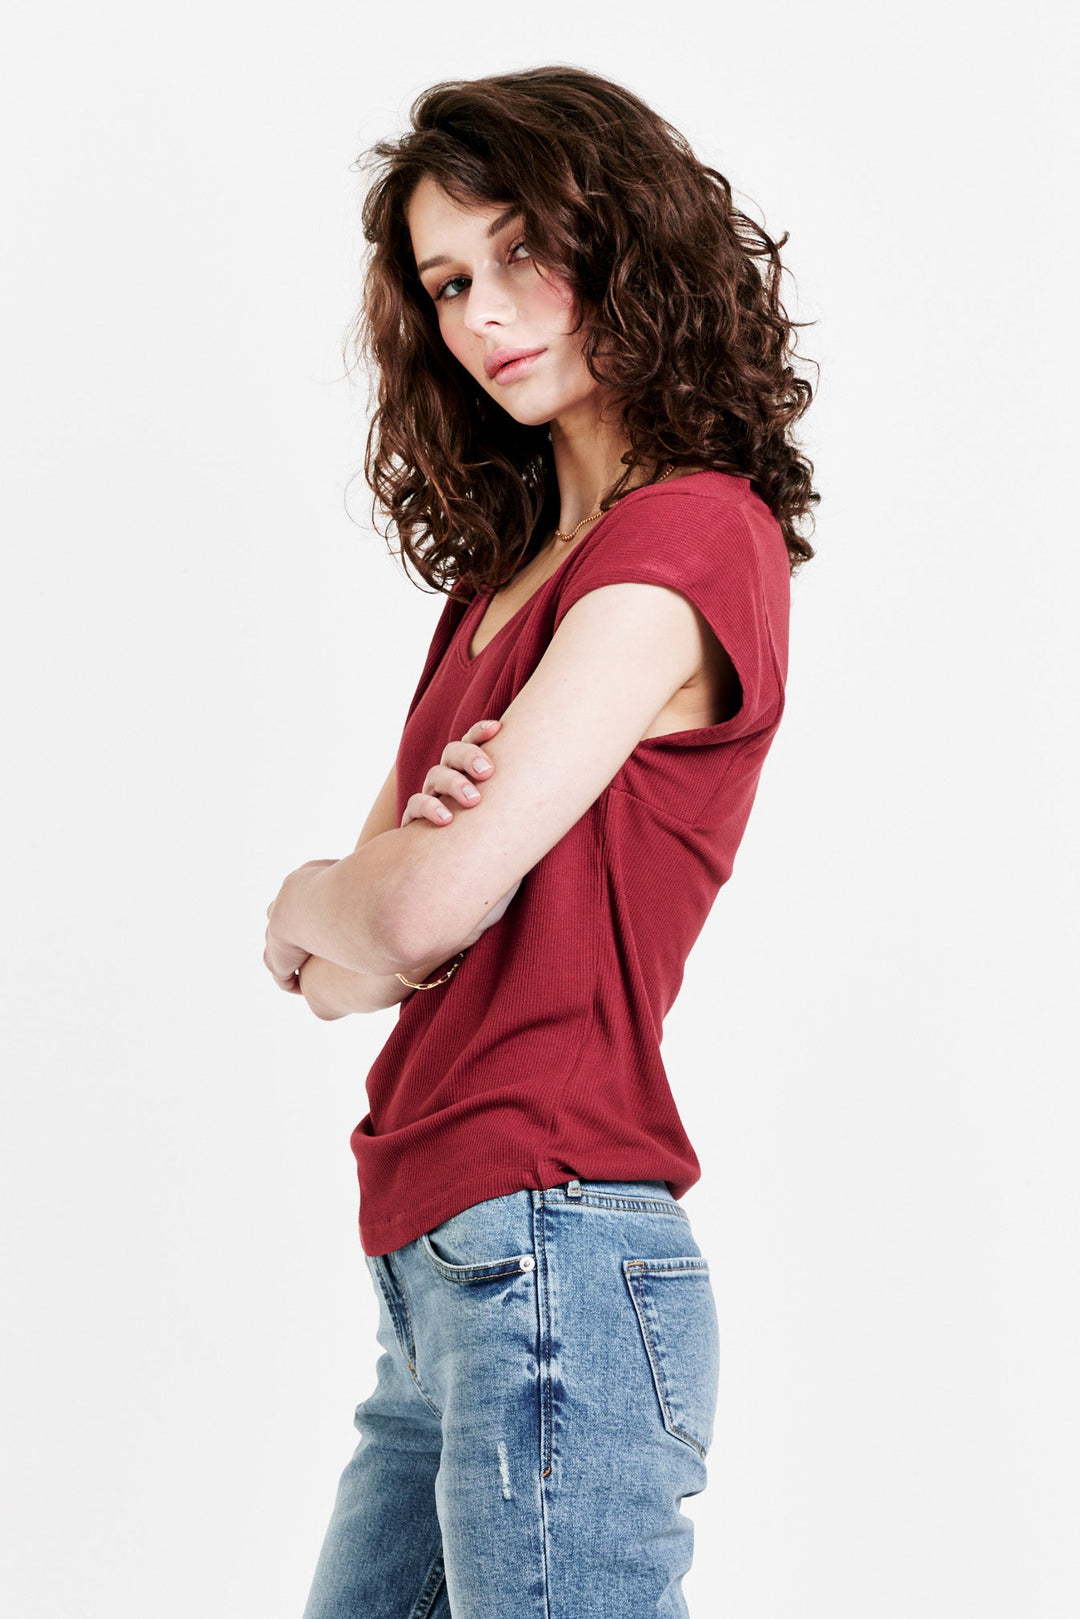 image of a female model wearing a URI THERMAL V-NECK TOP GOJI BERRY TOPS